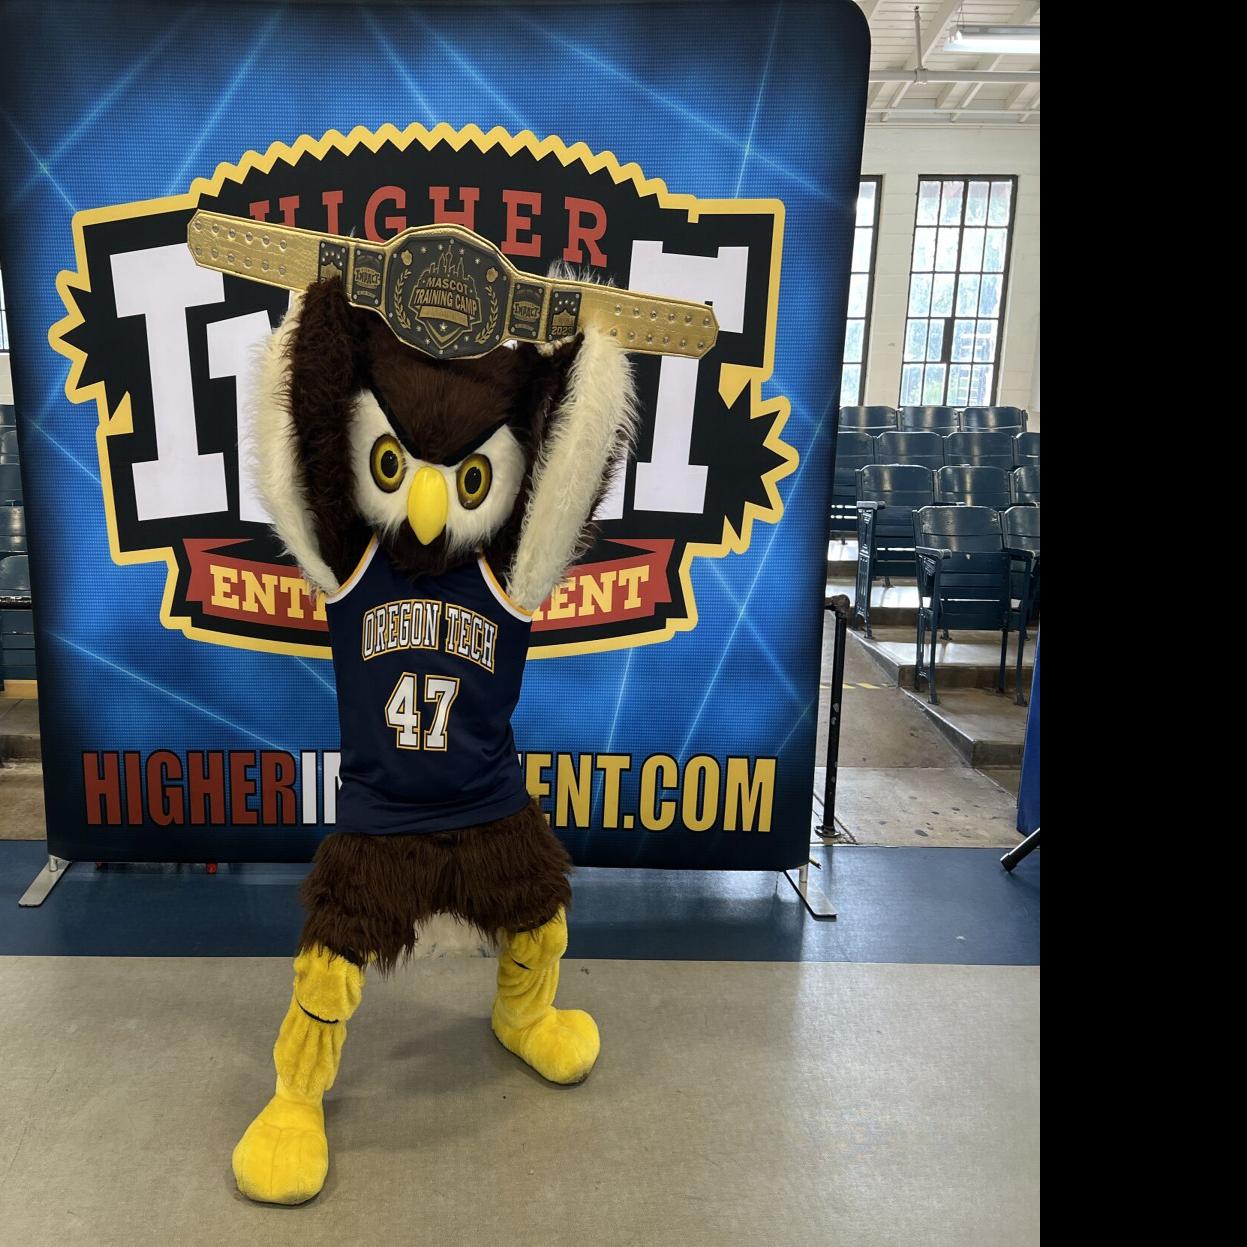 How Many of These 25 Maine Business Mascots Do You Know?